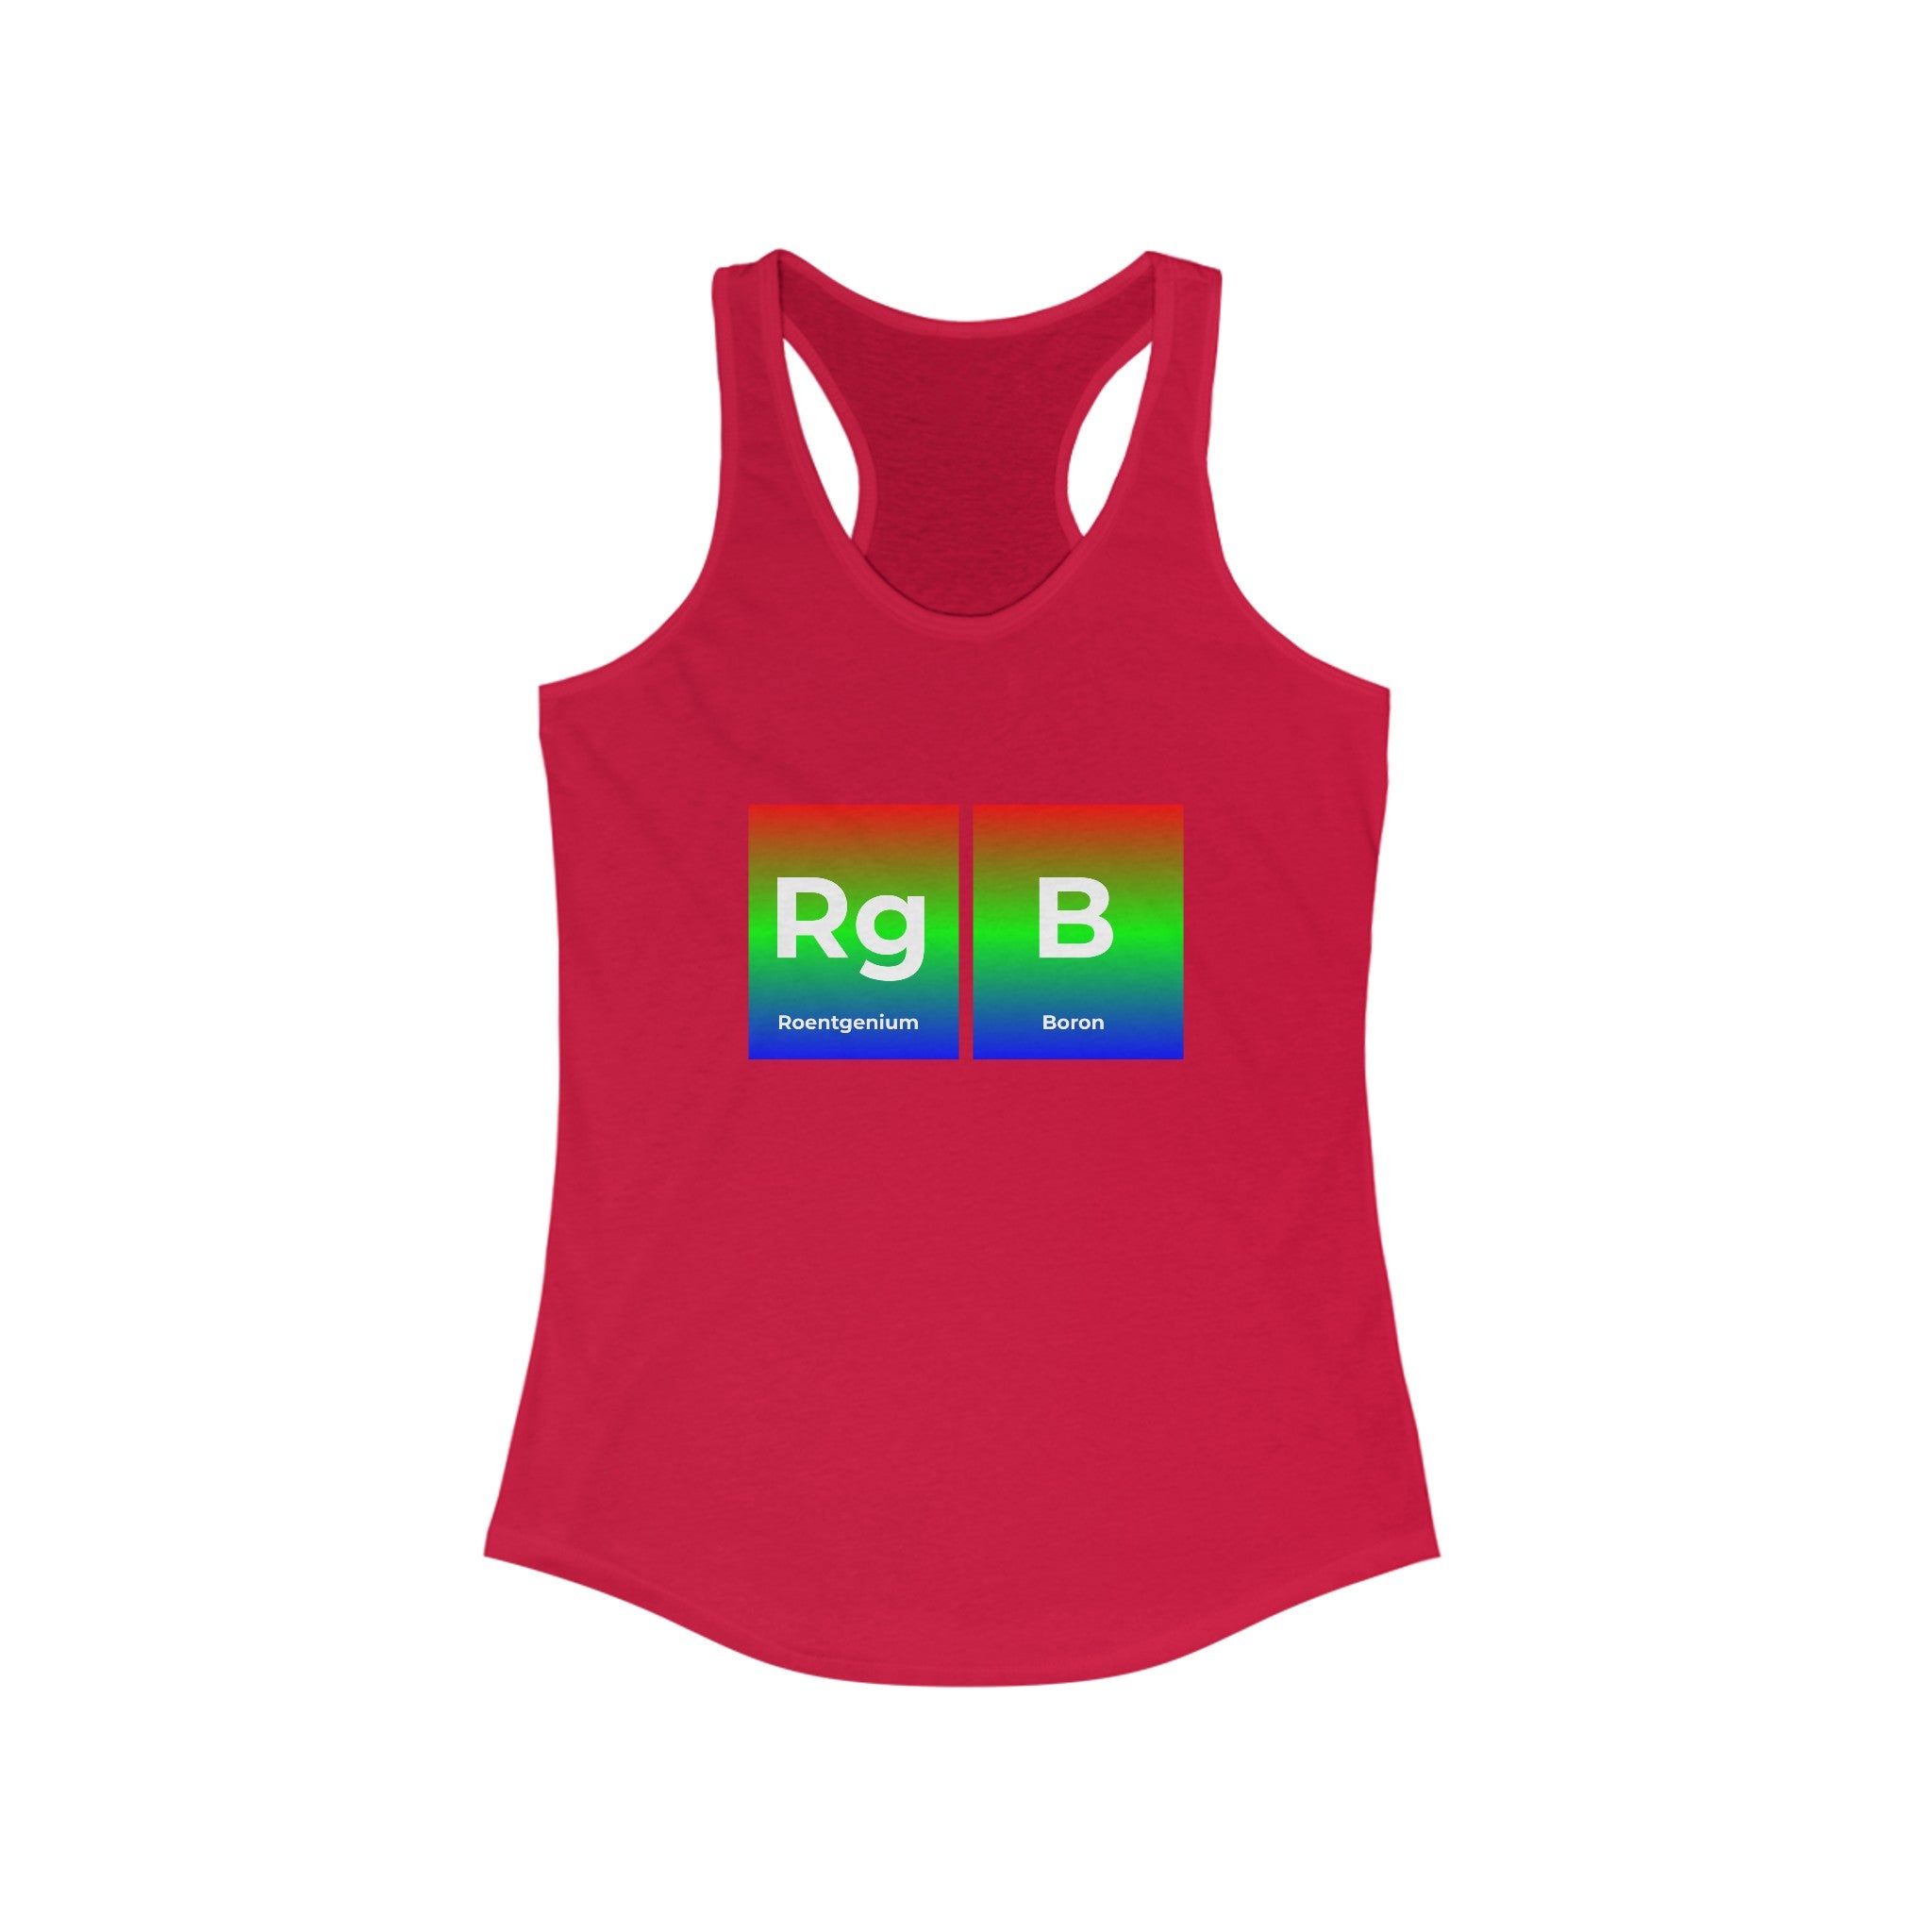 Red RG-B - Women's Racerback Tank featuring a high-quality design with the elements Roentgenium (Rg) and Boron (B) from the periodic table, set against a gradient background. Perfect for an active lifestyle.